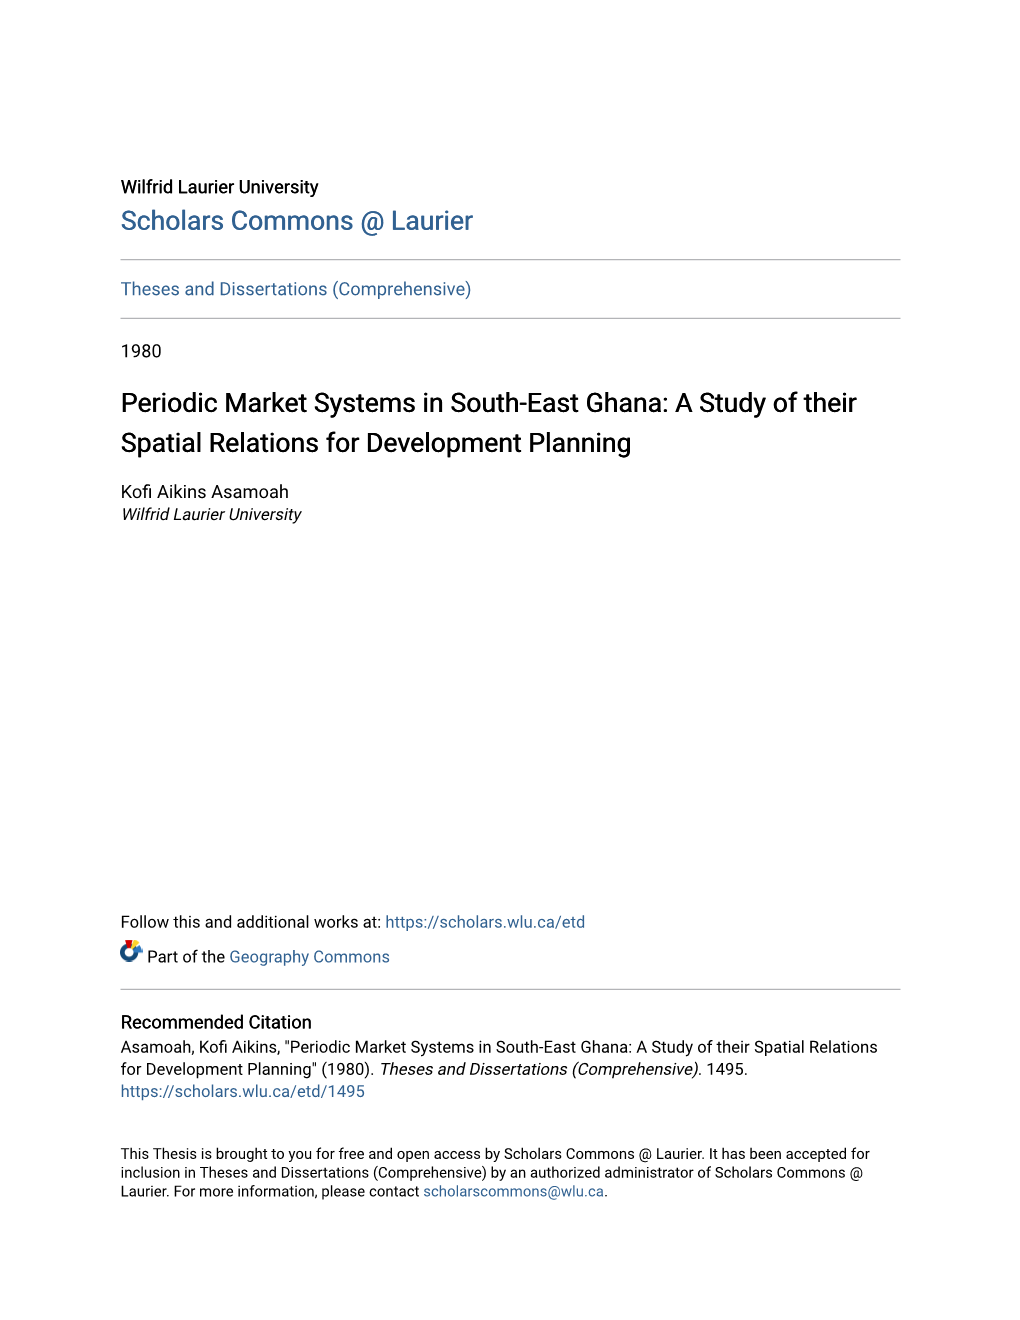 Periodic Market Systems in South-East Ghana: a Study of Their Spatial Relations for Development Planning